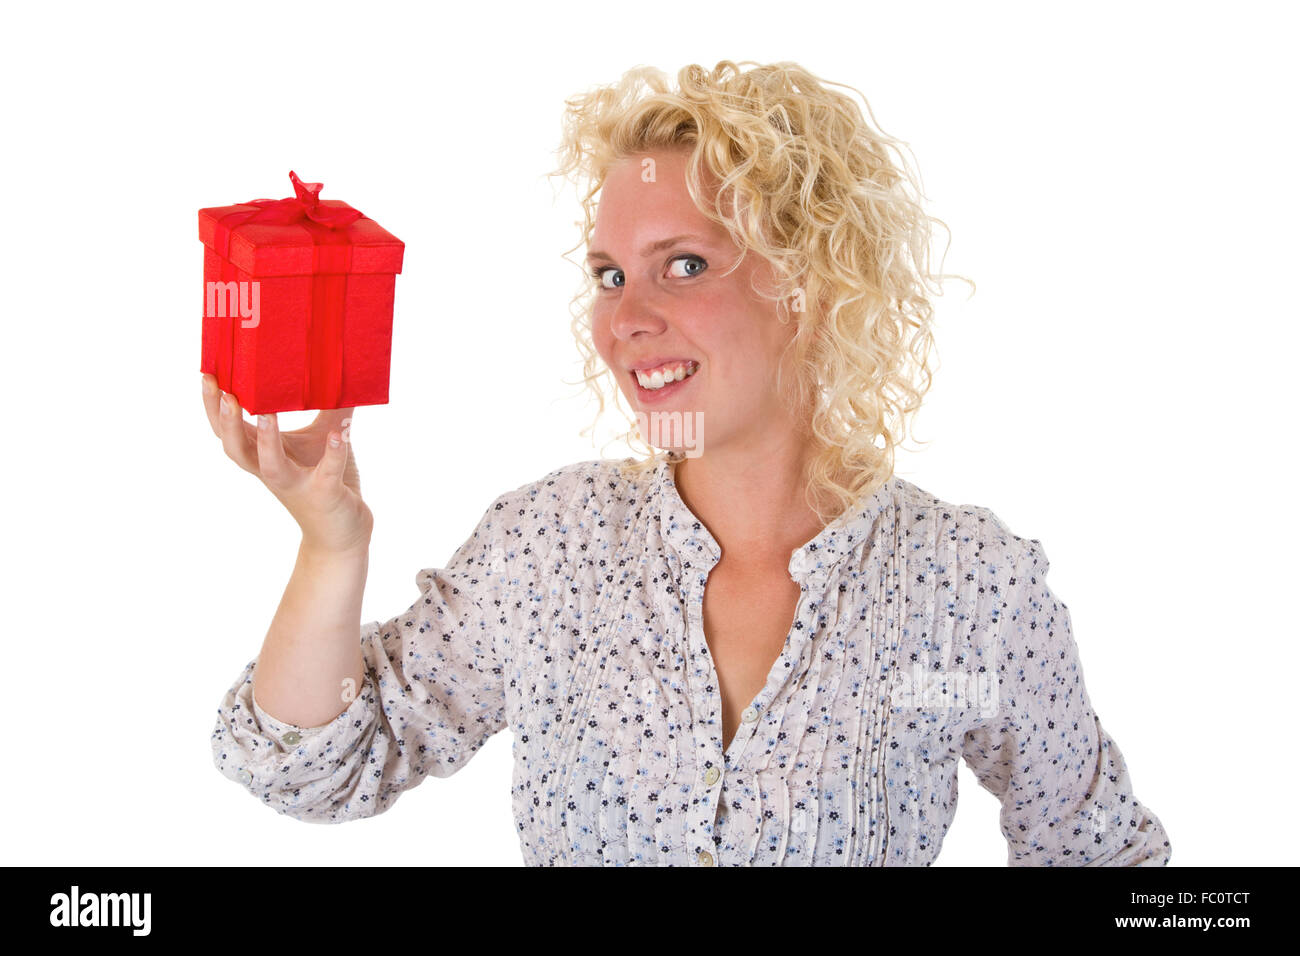 Young woman showing a gift Stock Photo